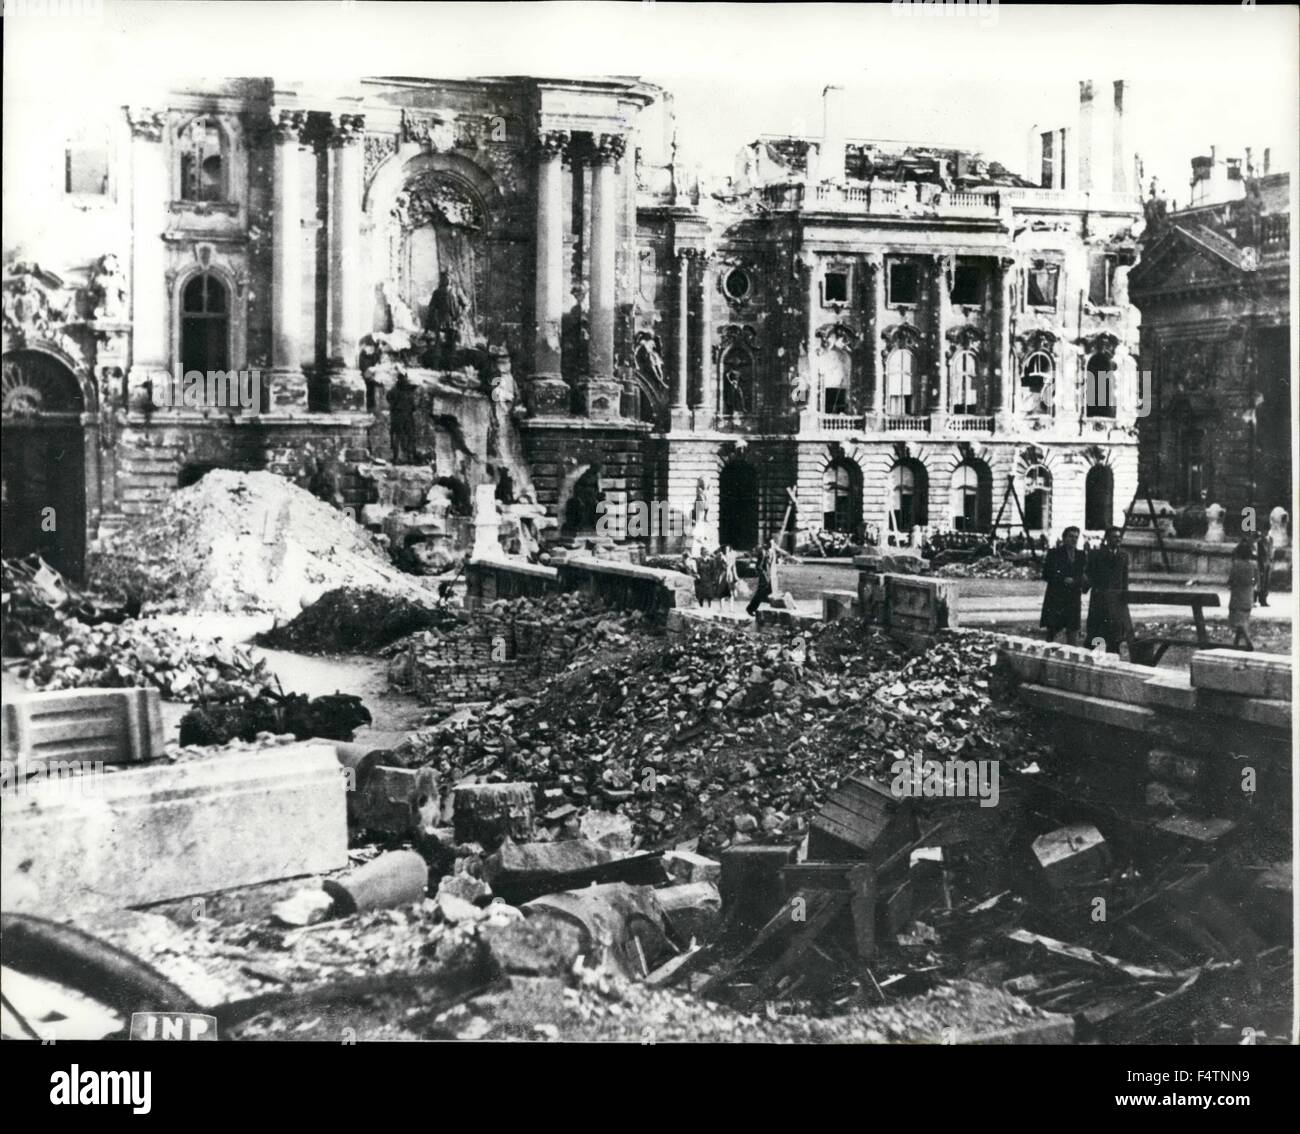 1963 - Hungary In Throws Of Economic Anarchy: Compared with Germany, Hungary suffered comparitively little from allied bombs, but the collapse of the Pengo, which is to Hungary what the dollar is to America, has caused a type of destruction that, in the long view, may prove far more punishing than the bombs that shattered Germany. The Pengo was worth 17.49 cents before the war. Today you night put down as valueless. If you wanted to deal in Pengoes you could get 6,000,000 of them for a dollar. Mecca of dealers in Budapest today is the black market, and the Merchant Prince is the man who has a Stock Photo